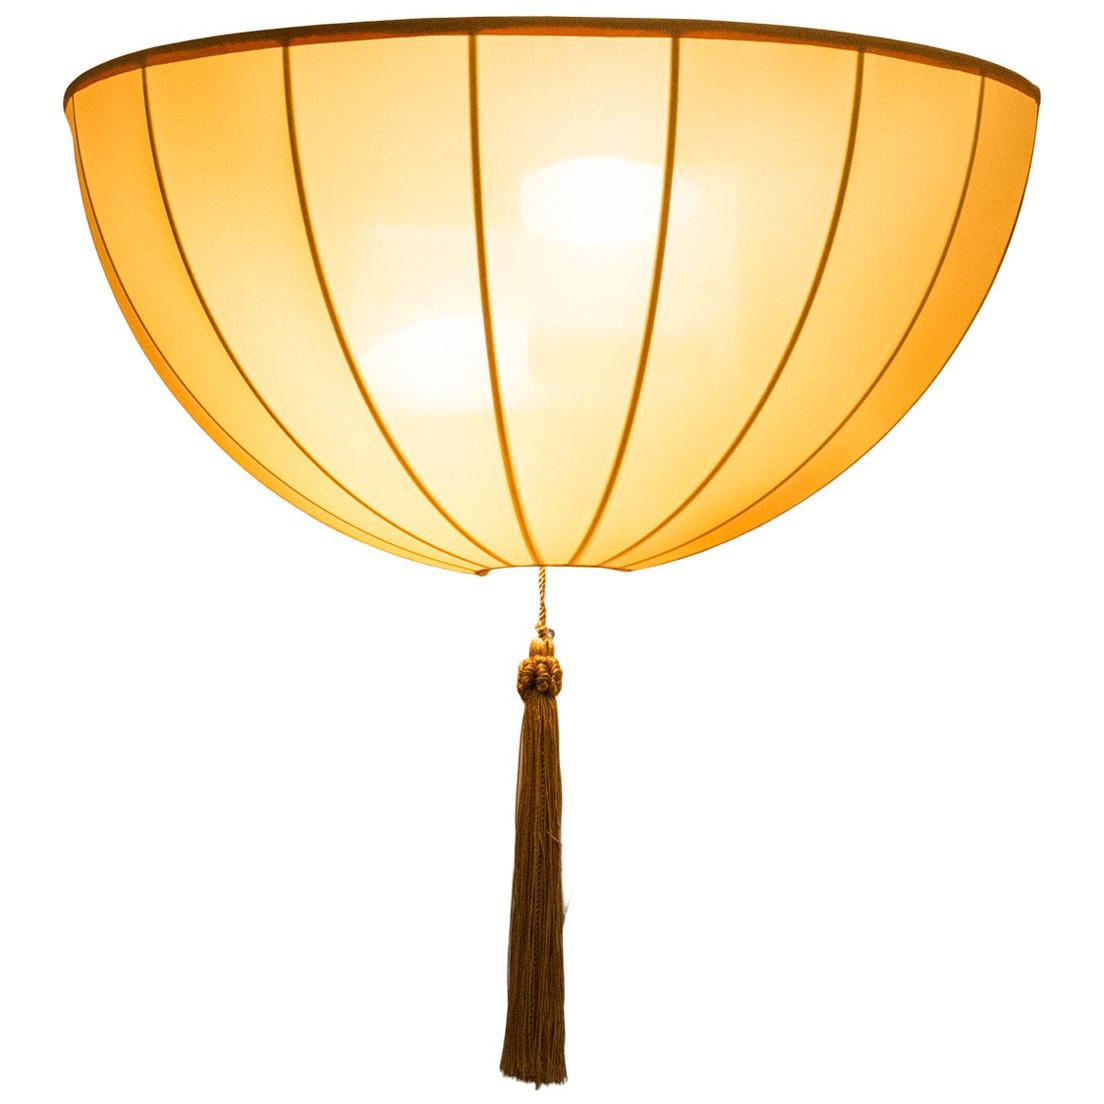 Elegant wall lamp suitable to the fabric department pendants of the Wiener Werkstaette
Material
Metal frame work covered with silk
Most components according to the UL regulations, with an additional charge we will UL-list and label our fixtures.